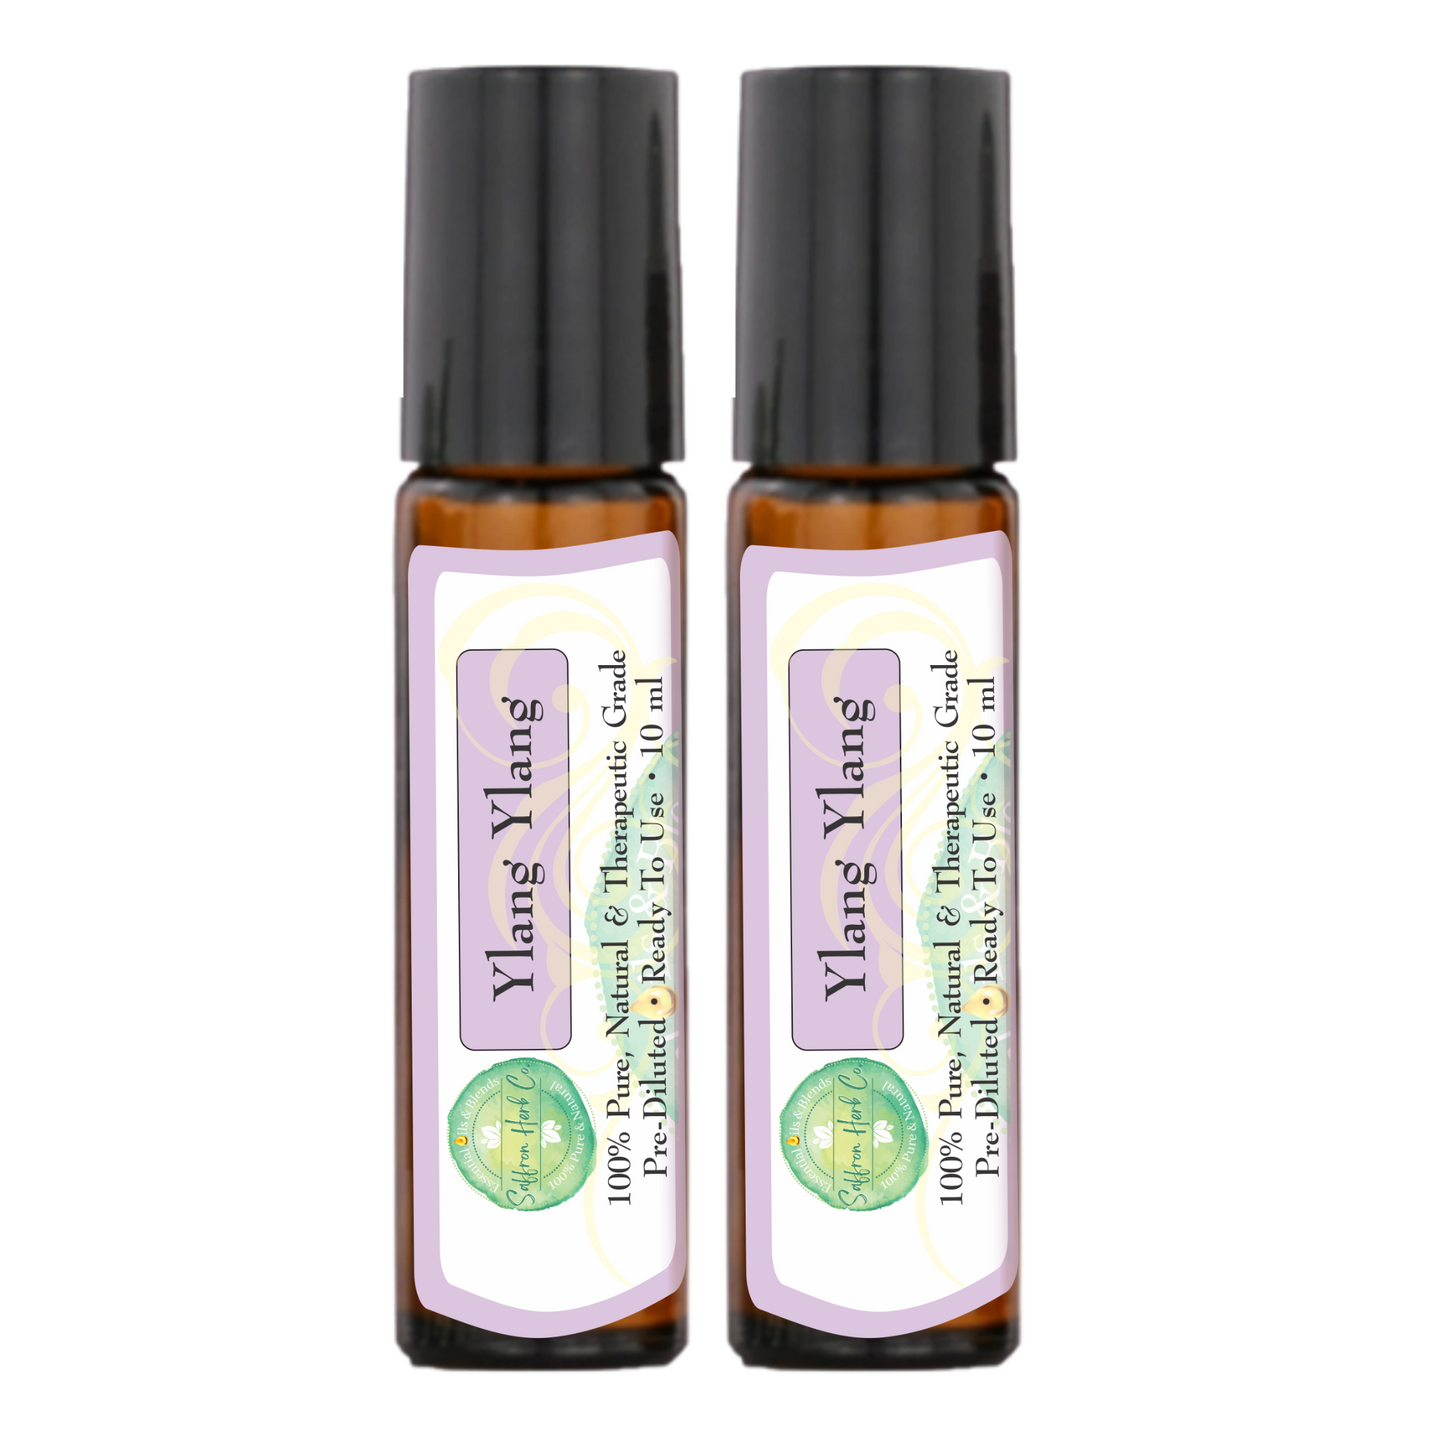 Ylang Ylang Essential Oil Roller Bottle Blend • 100% Pure & Natural • Pre-Diluted • Ready To Use